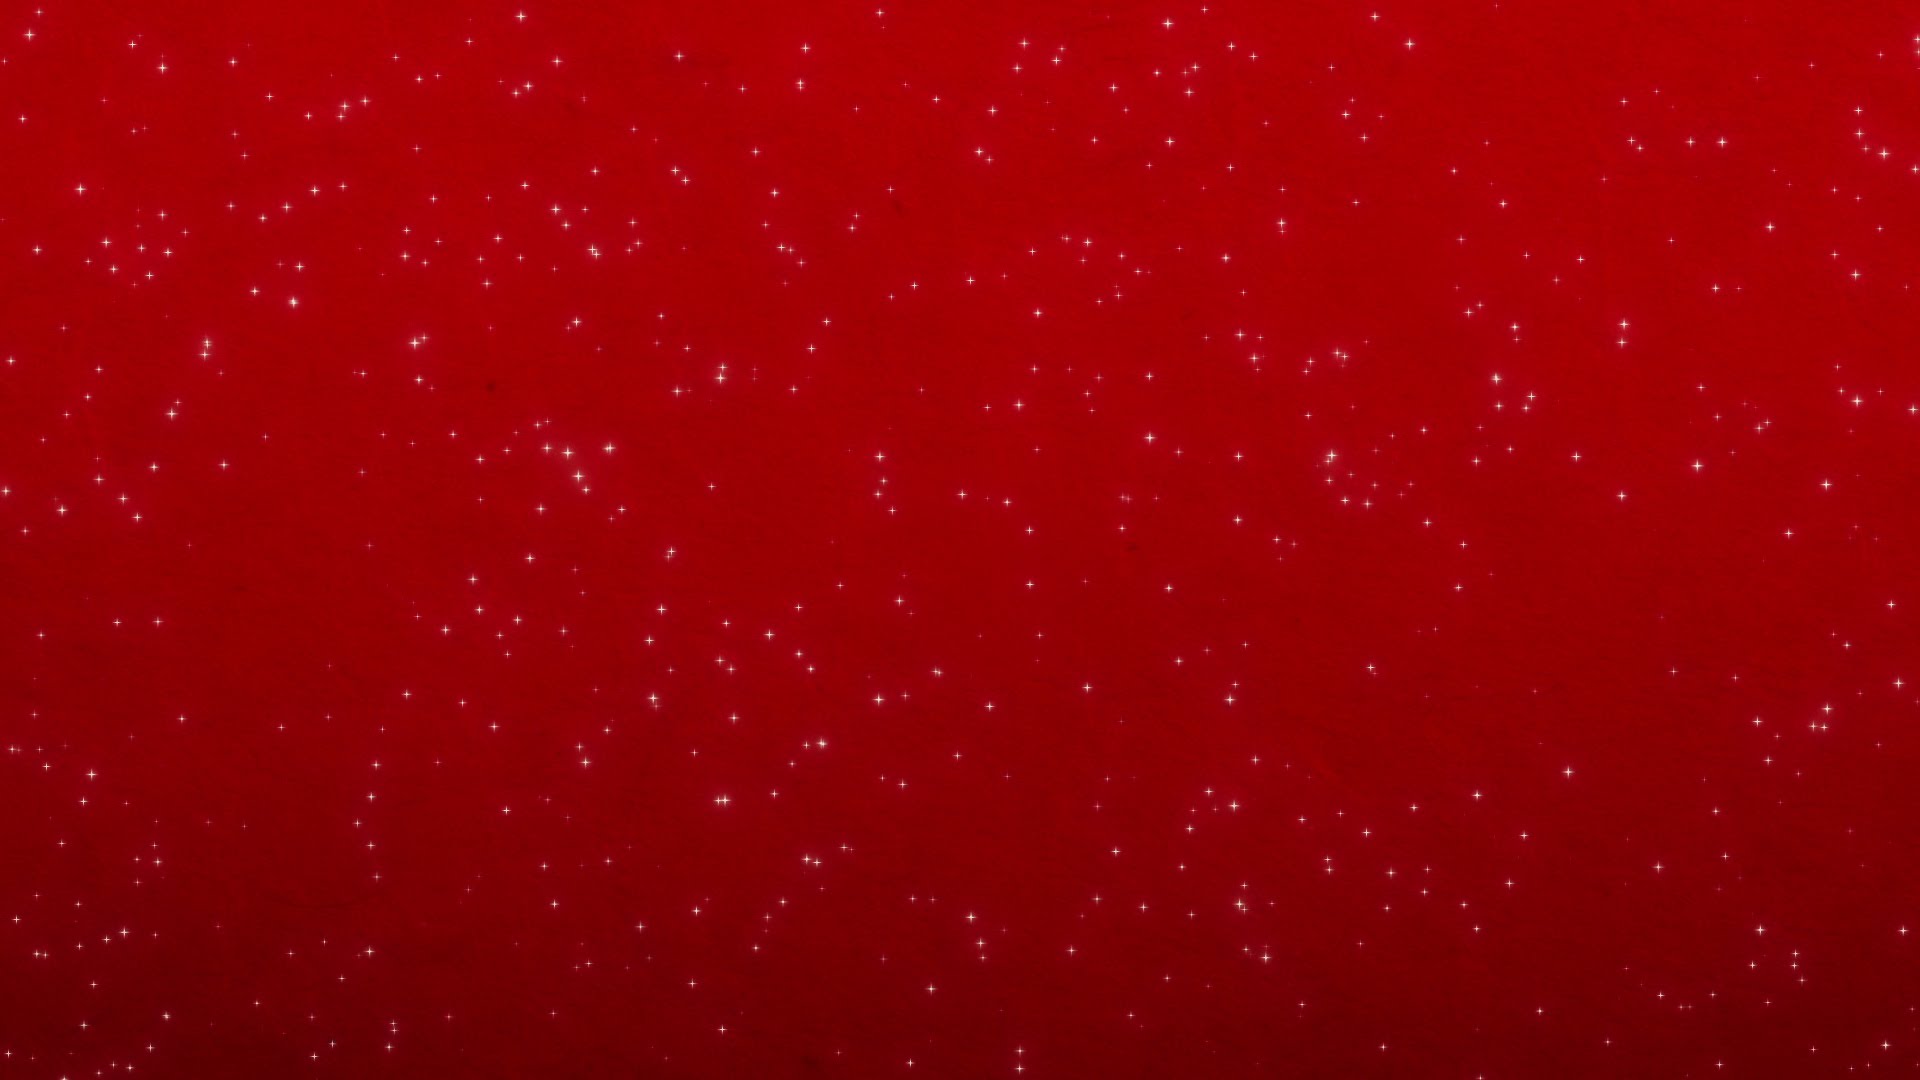 Red Sparkles - HD Video Background Loop - YouTube